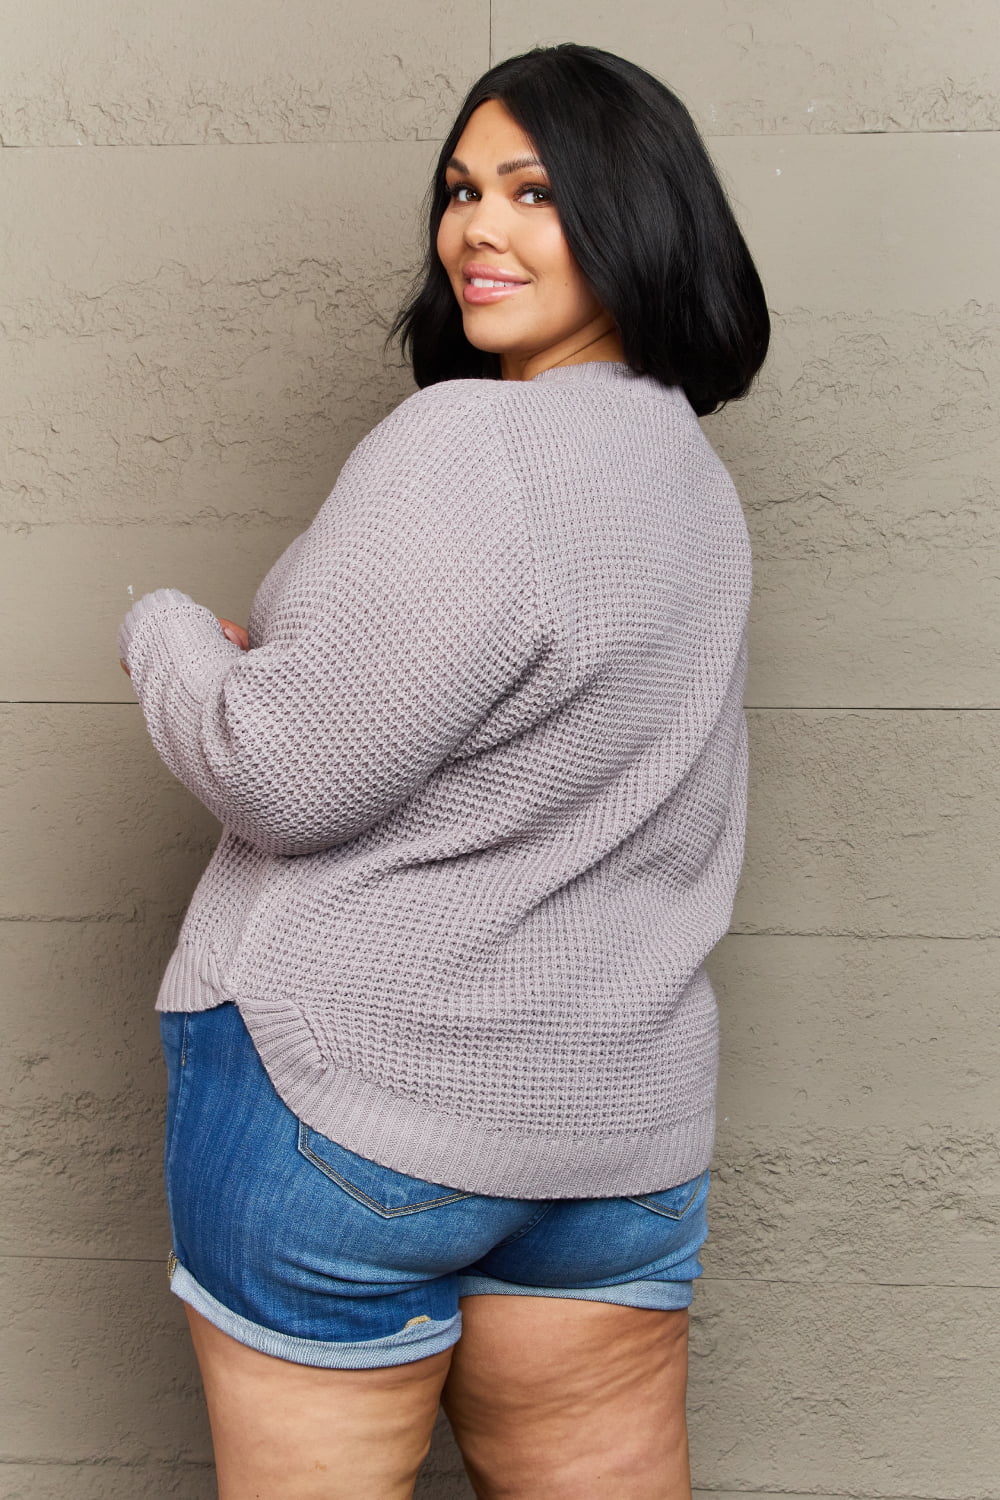 Breezy Days Plus Size High Low Waffle Knit Sweater - Sweaters - Shirts & Tops - 2 - 2024